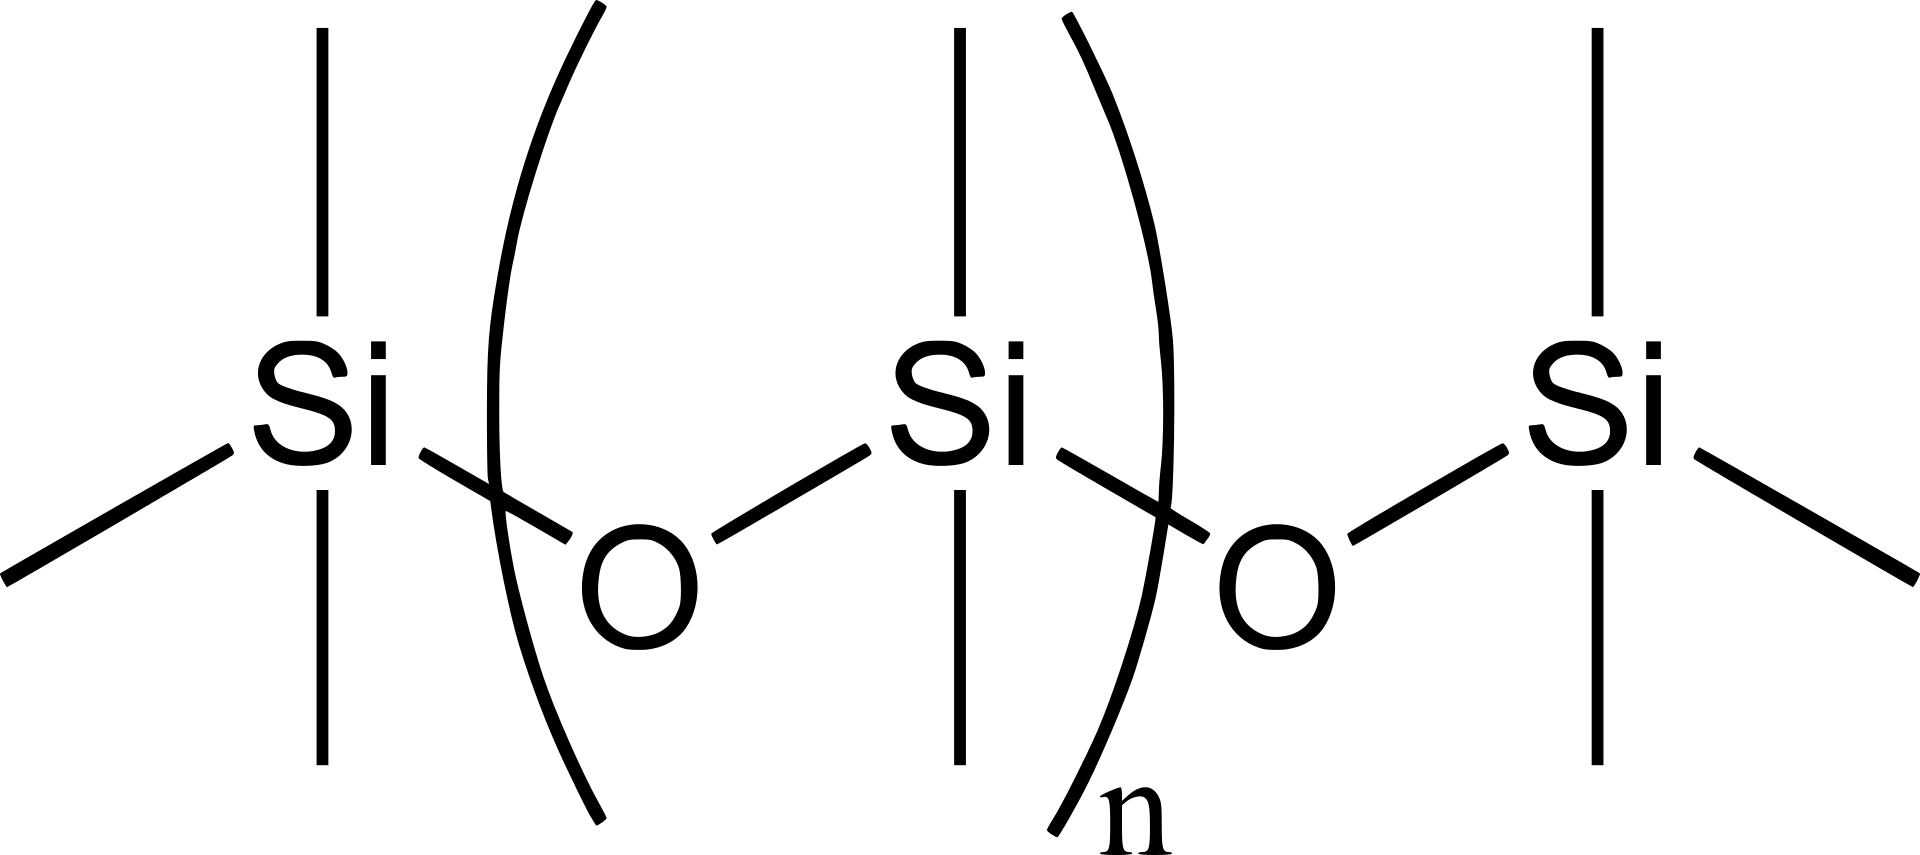 Chemical structure of the silicone polydimethylsiloxane